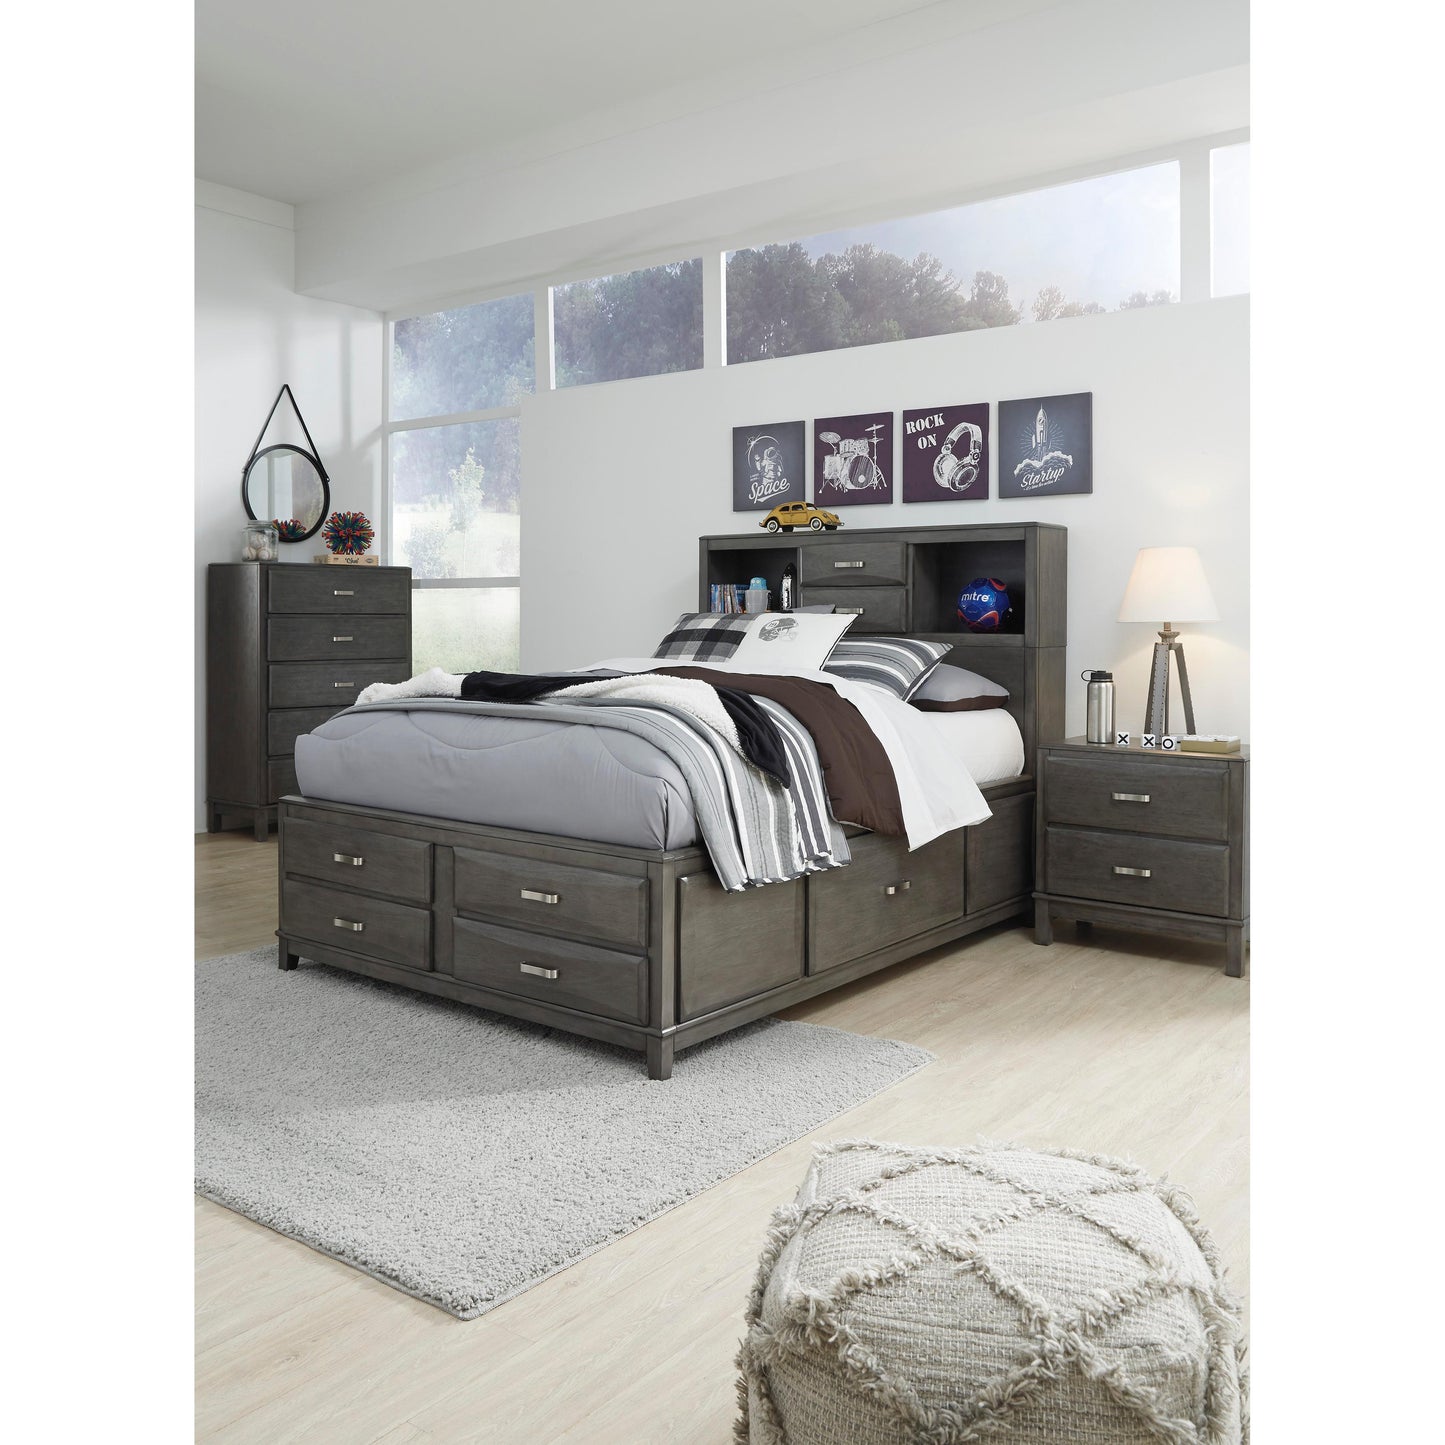 Signature Design by Ashley Kids Beds Bed B476-77/B476-74/B476-88